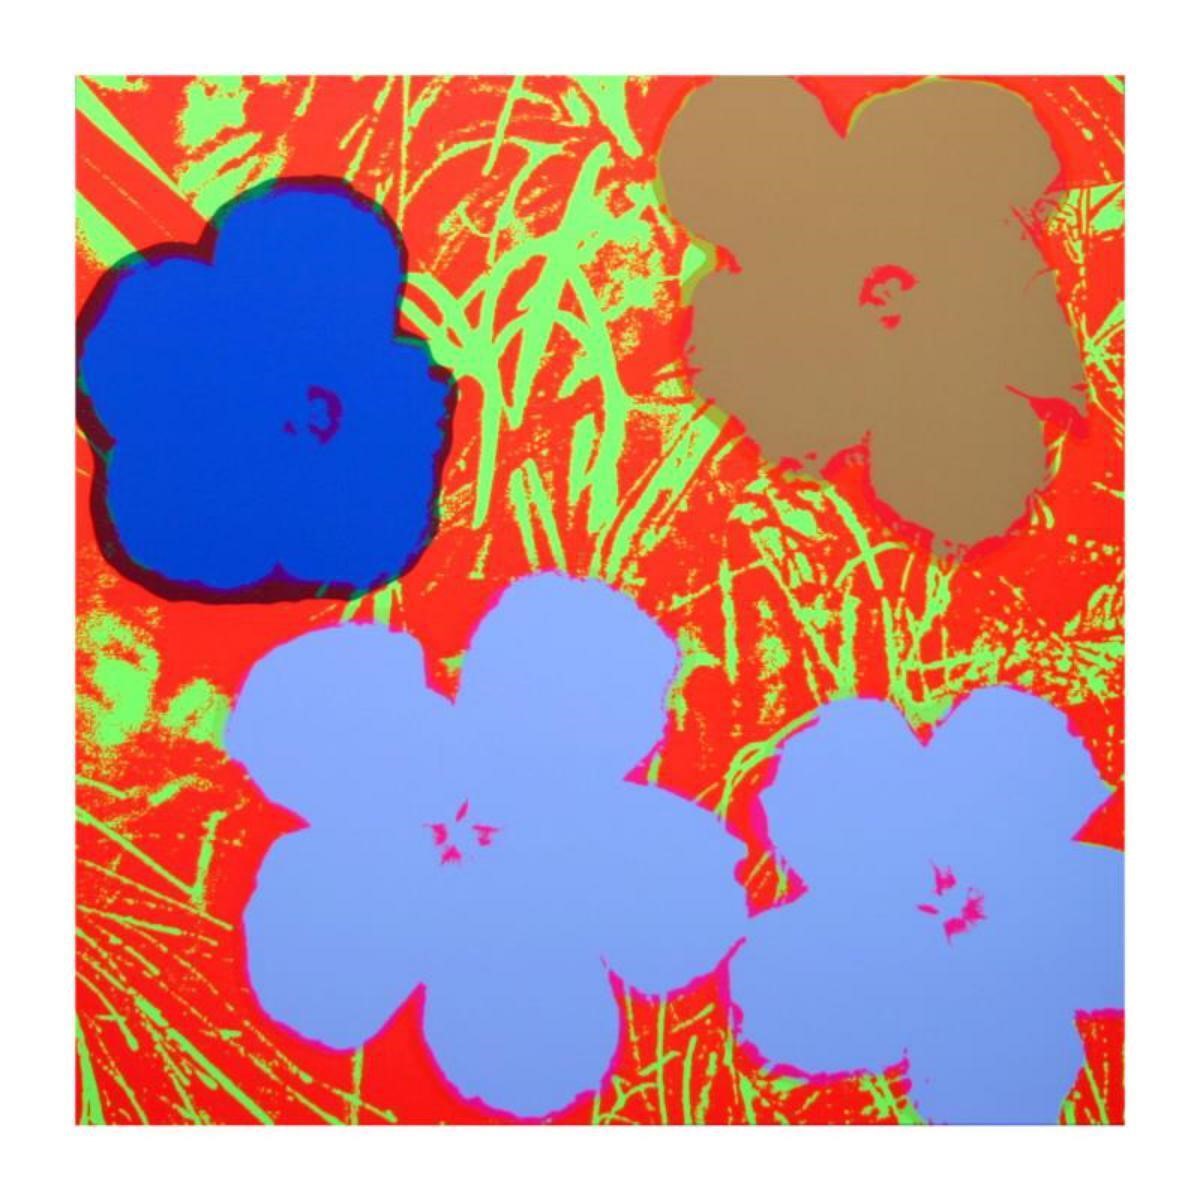 Andy Warhol "Flowers 11.69" Silk Screen Print from